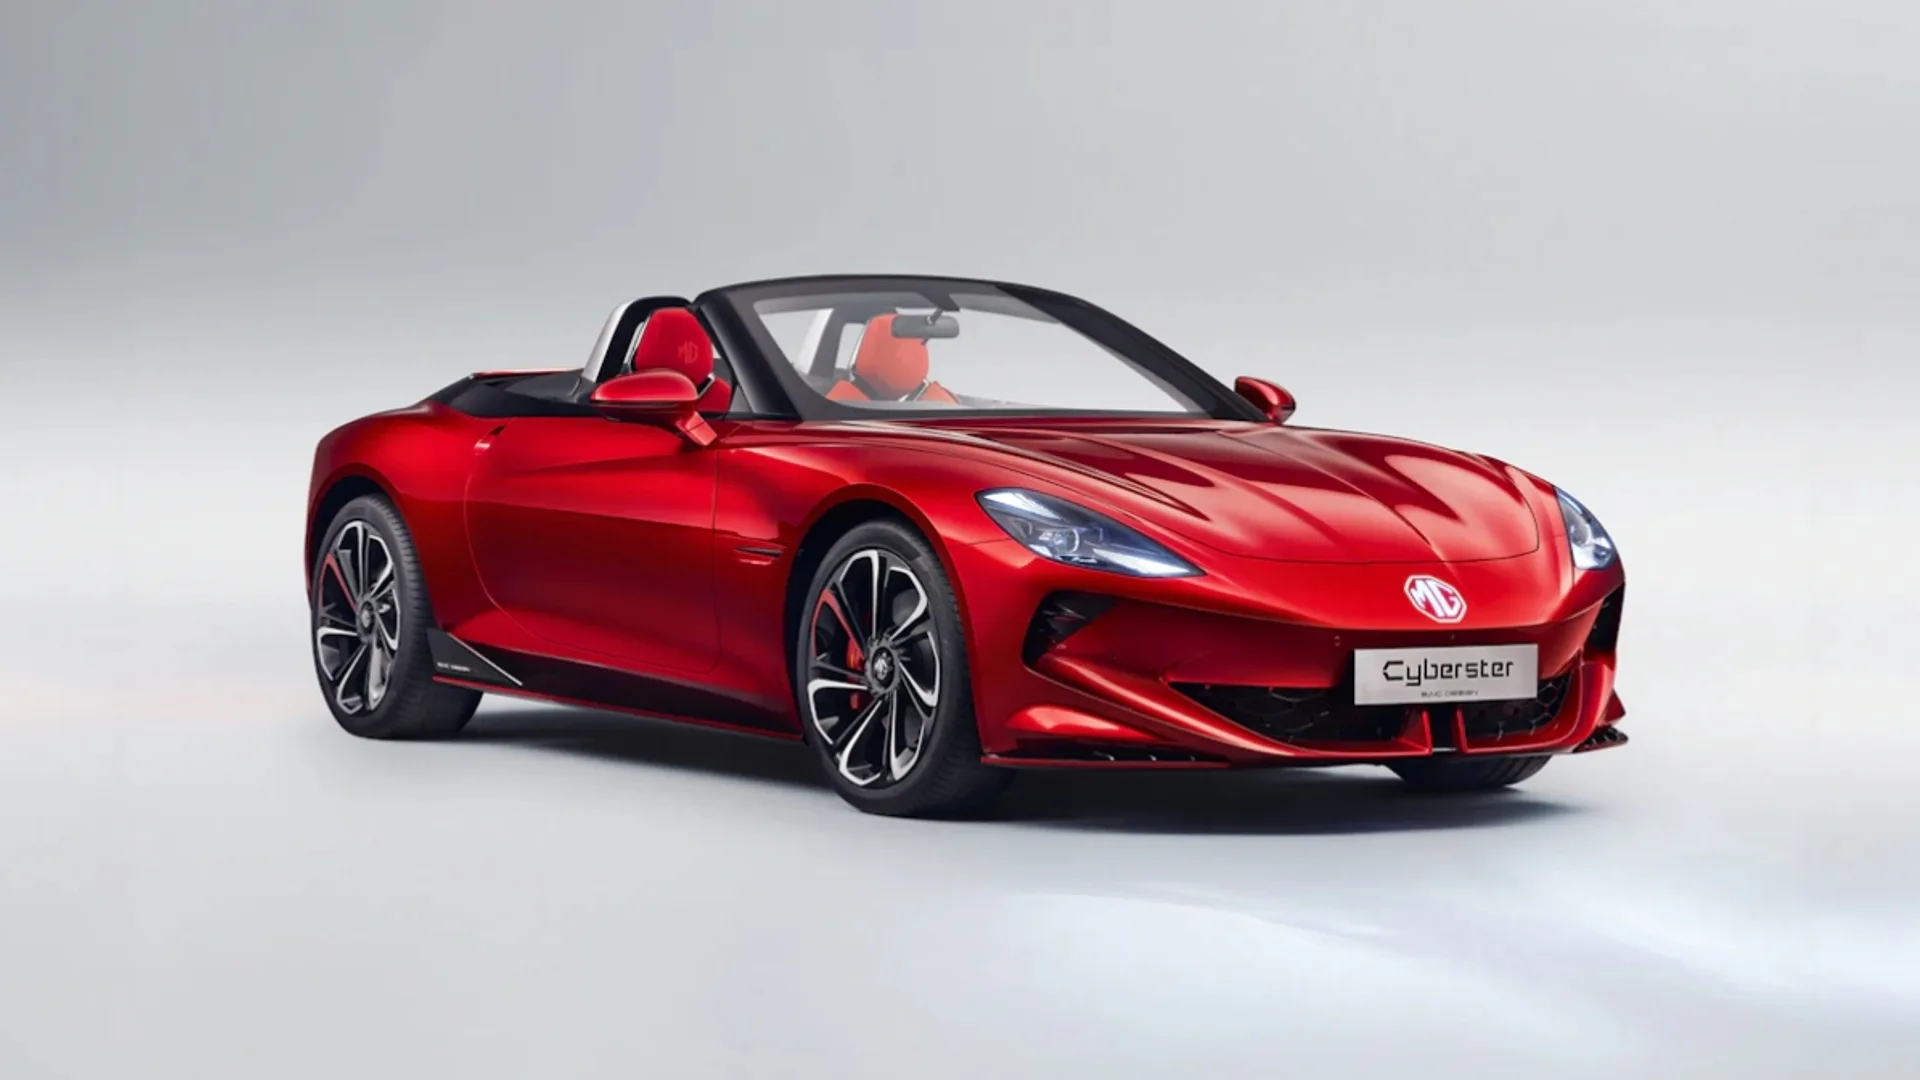 MG Motor Unveils Electric Sportscar Cyberster in India